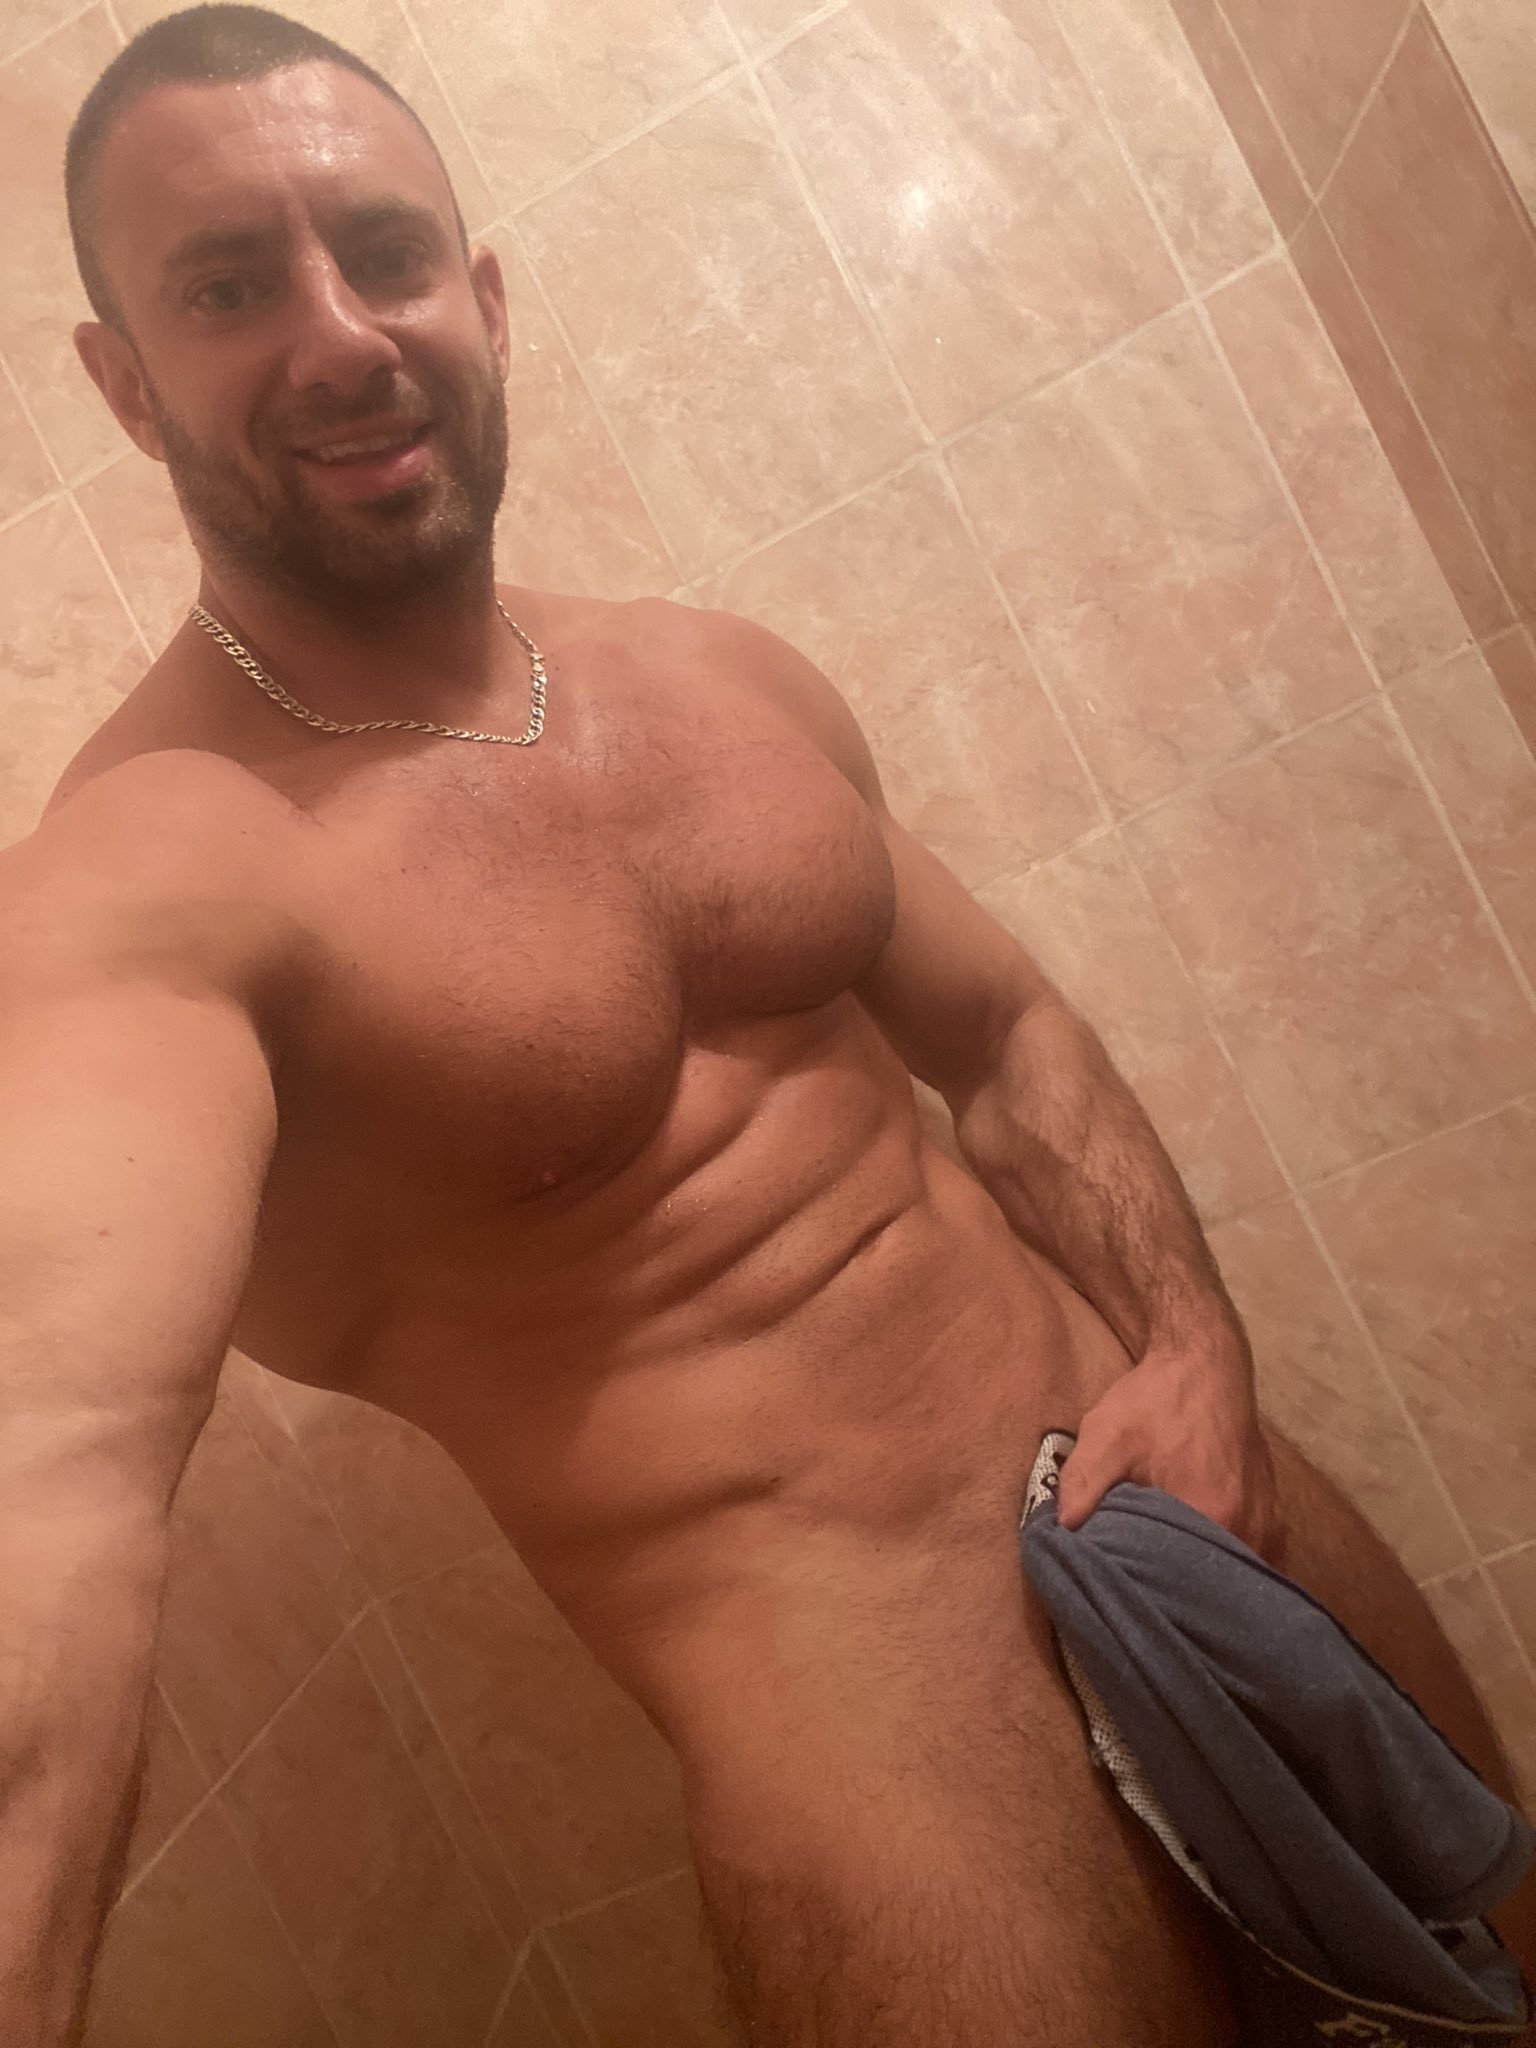 Watch the Photo by Ultra-Masculine-XXX with the username @Ultra-Masculine-XXX, posted on May 16, 2022. The post is about the topic Gay Hairy Men. and the text says 'Artur Kratko #ArturKratko #hairy #muscle #hunk'